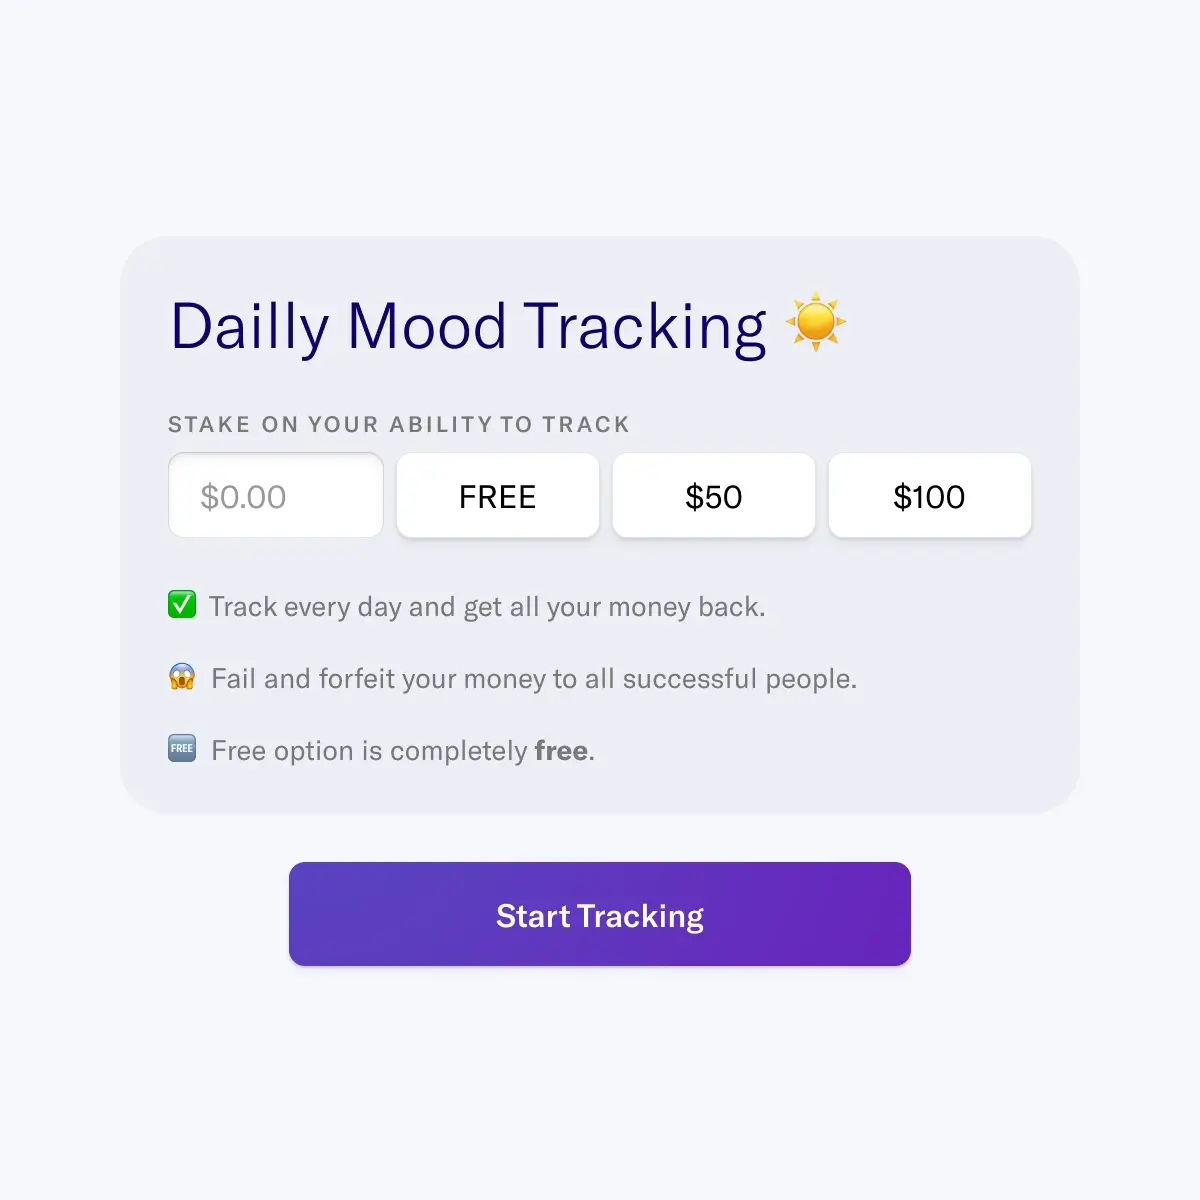 There are a variety of ways to stay accountable for logging your mood - free, pledged, public, and private